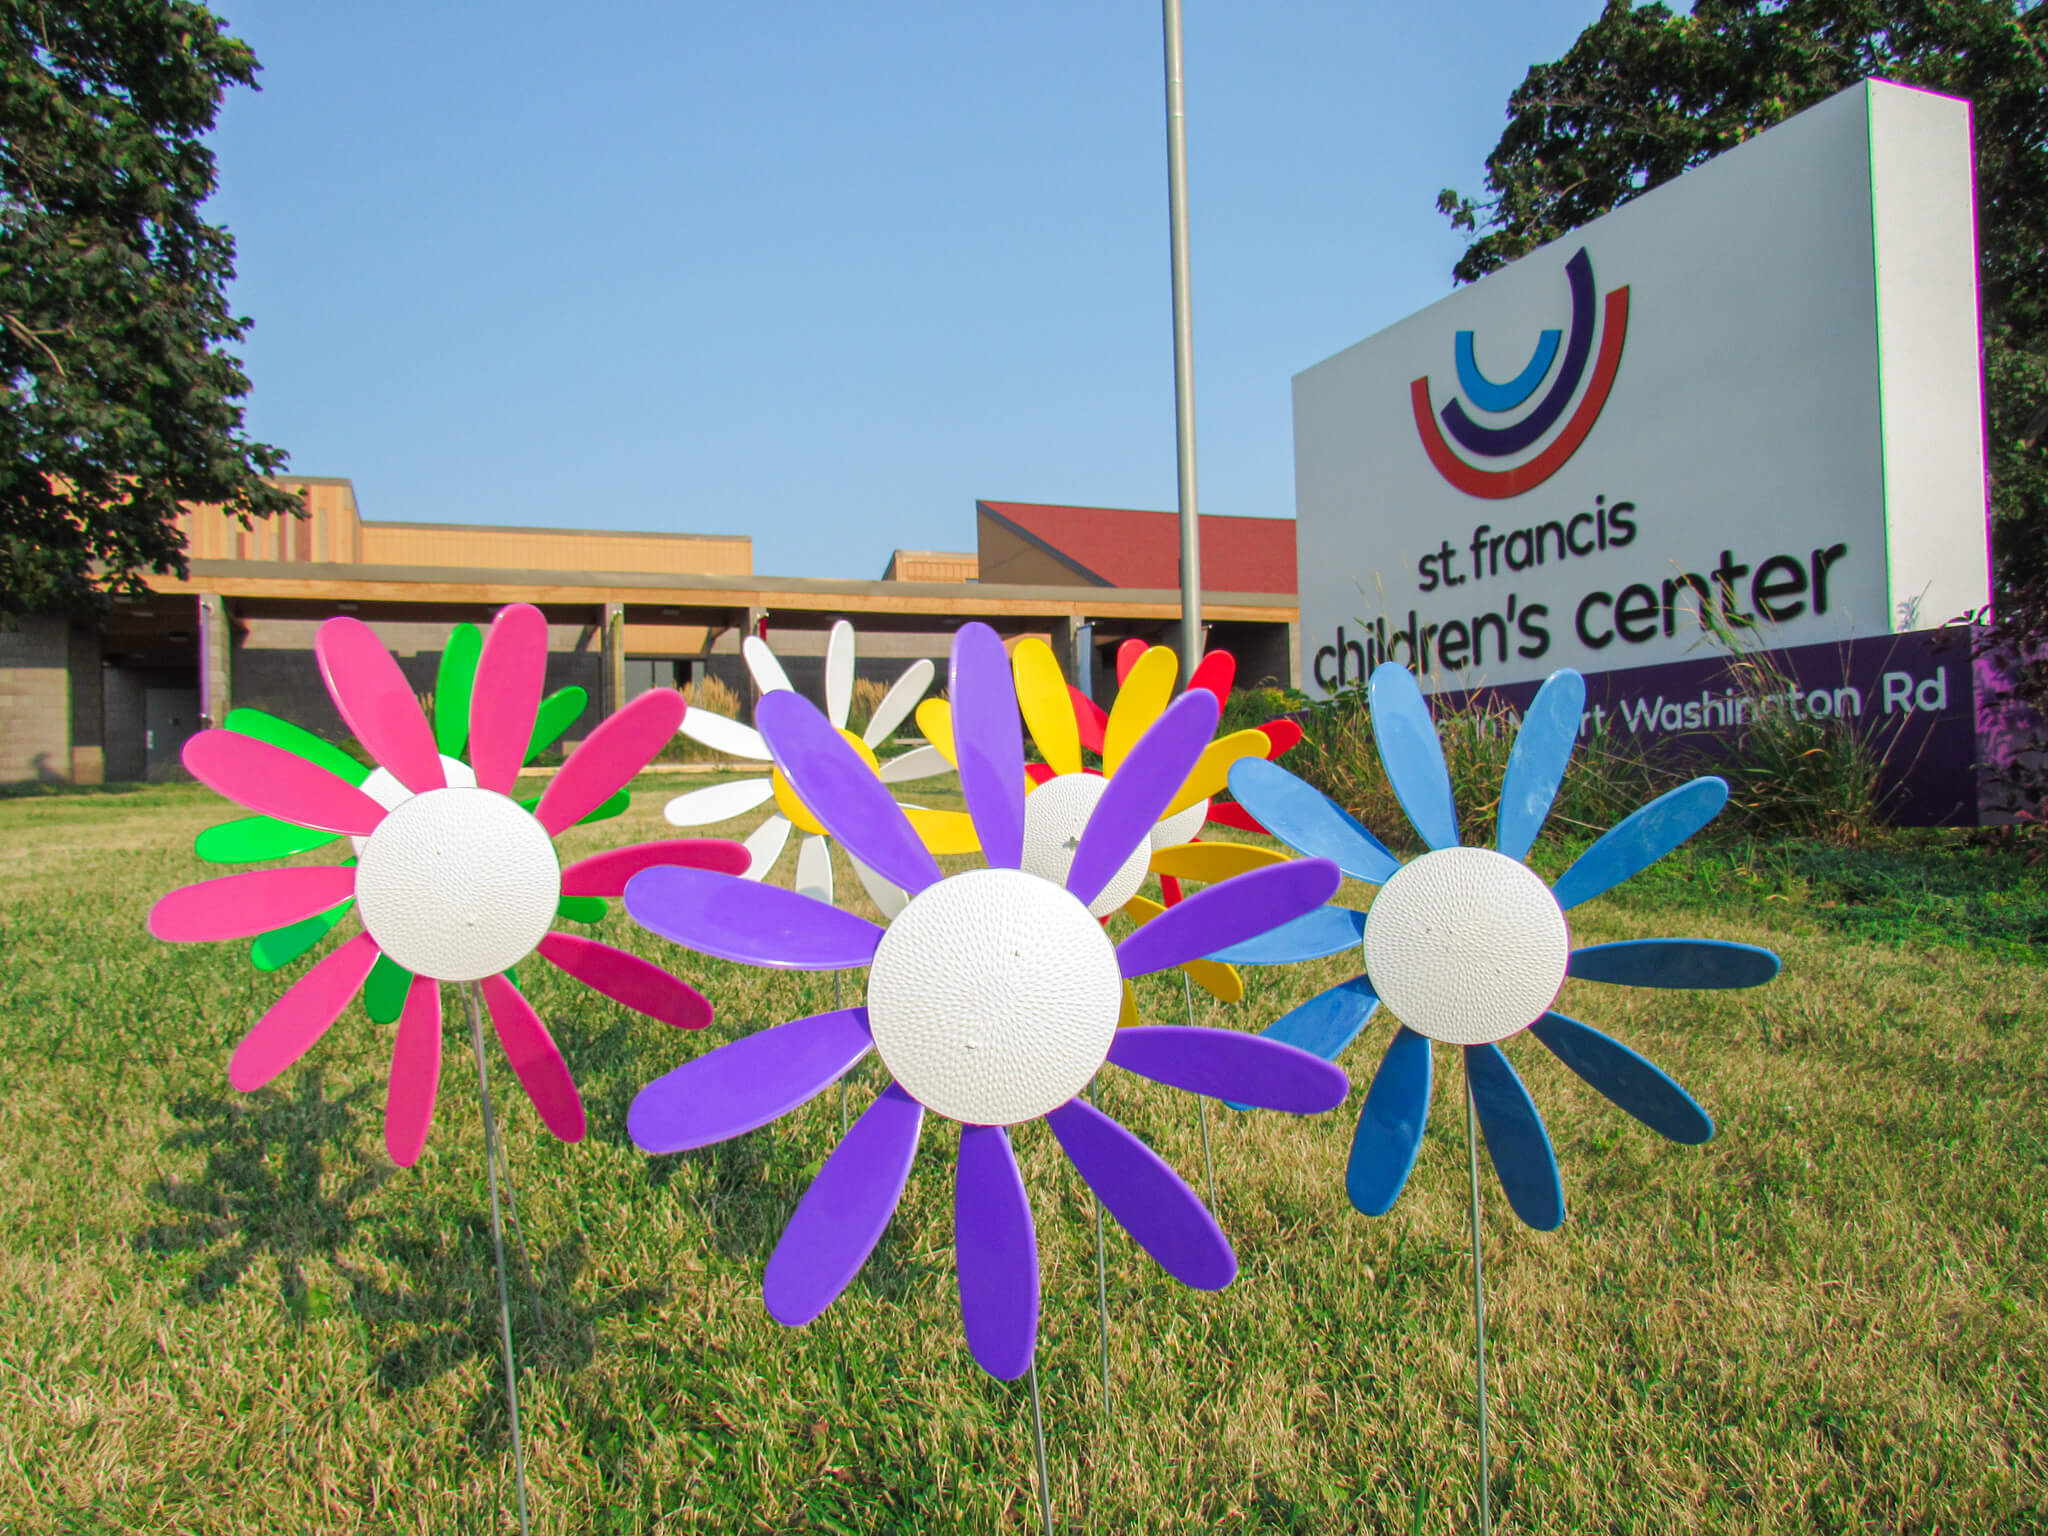 St. Francis Children’s Center Grows a “Garden” of Daisies Spinners to Raise Funds for Kids with Special Needs